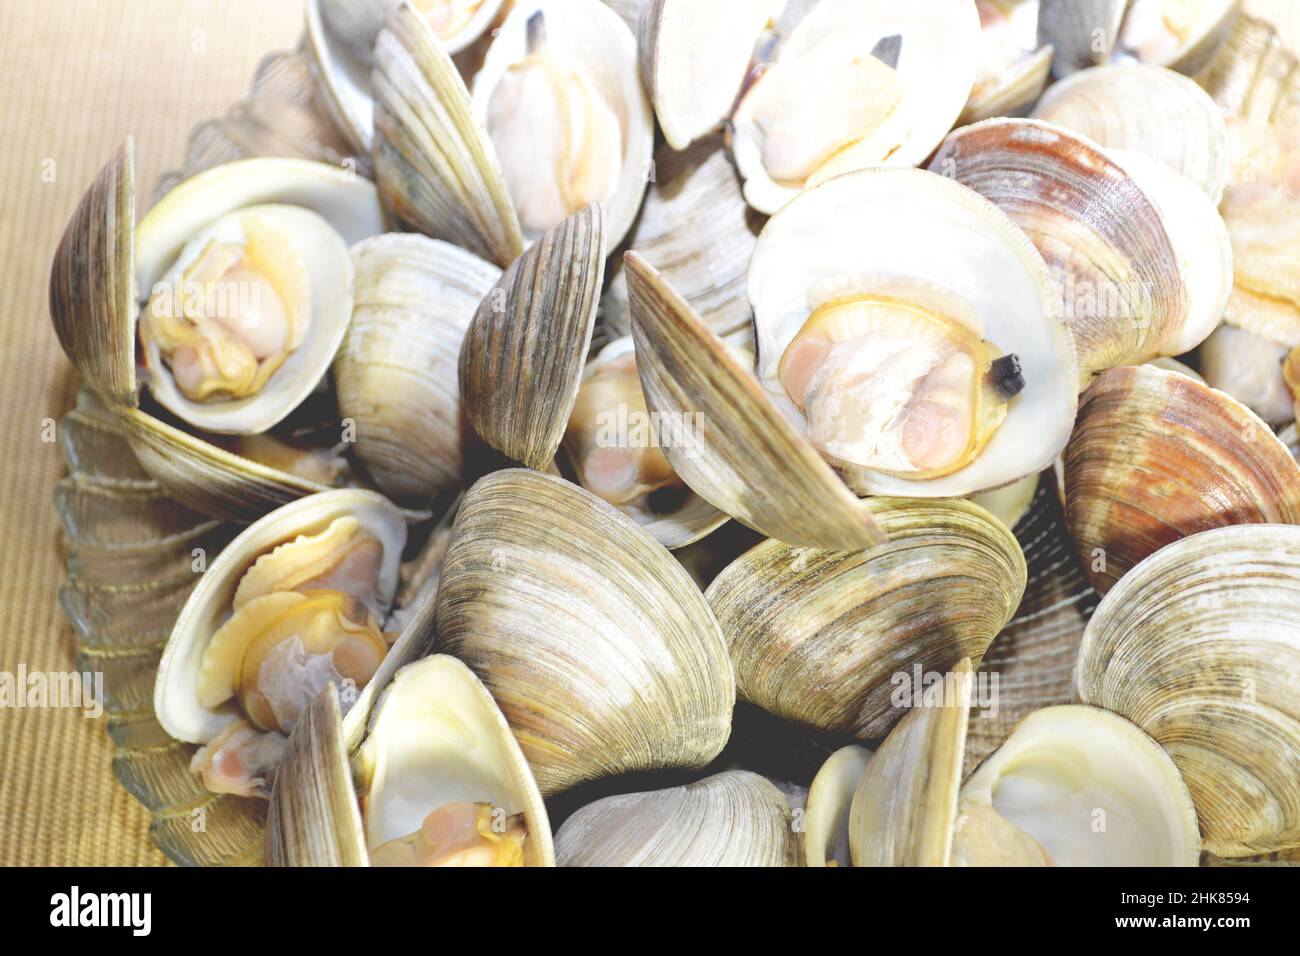 Gegartes Whole Belly Steamer Clams Stockfoto